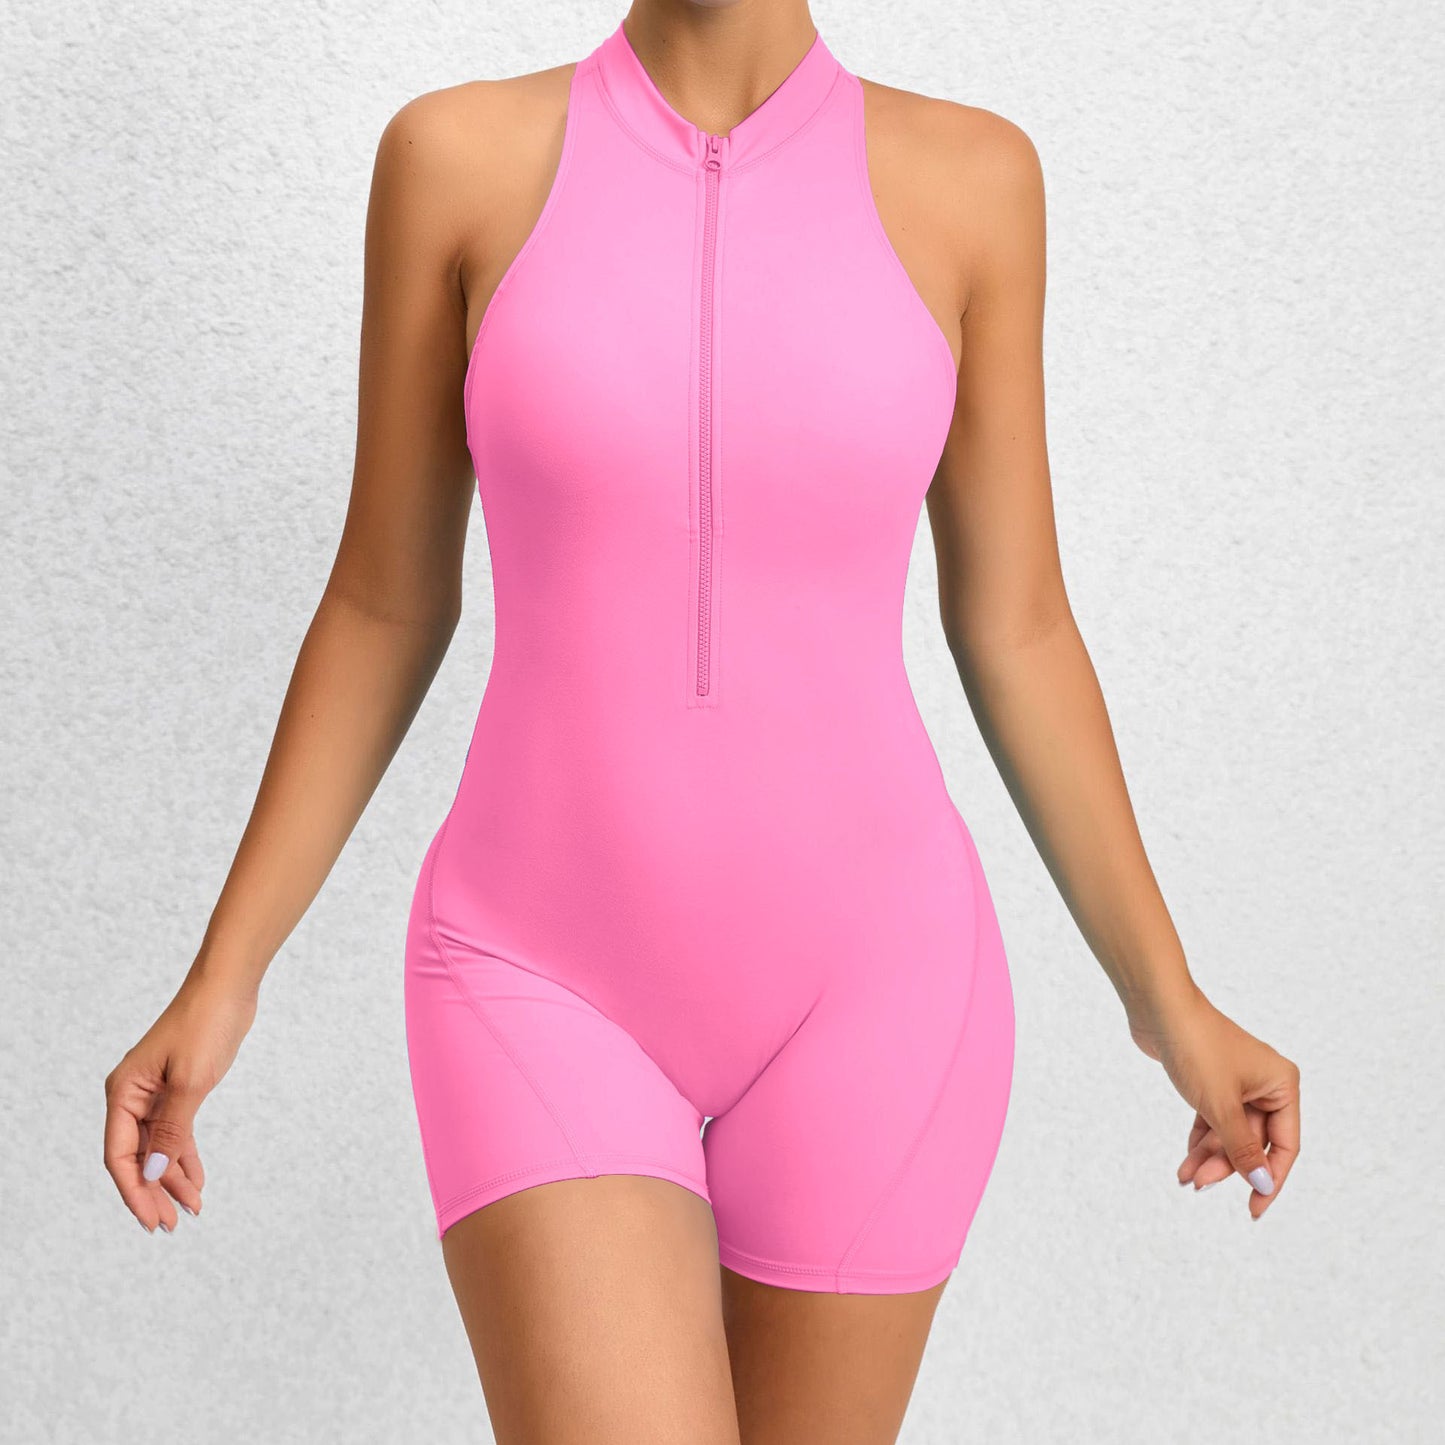 High-Impact Sleeveless Workout Romper with Zipper - Pink